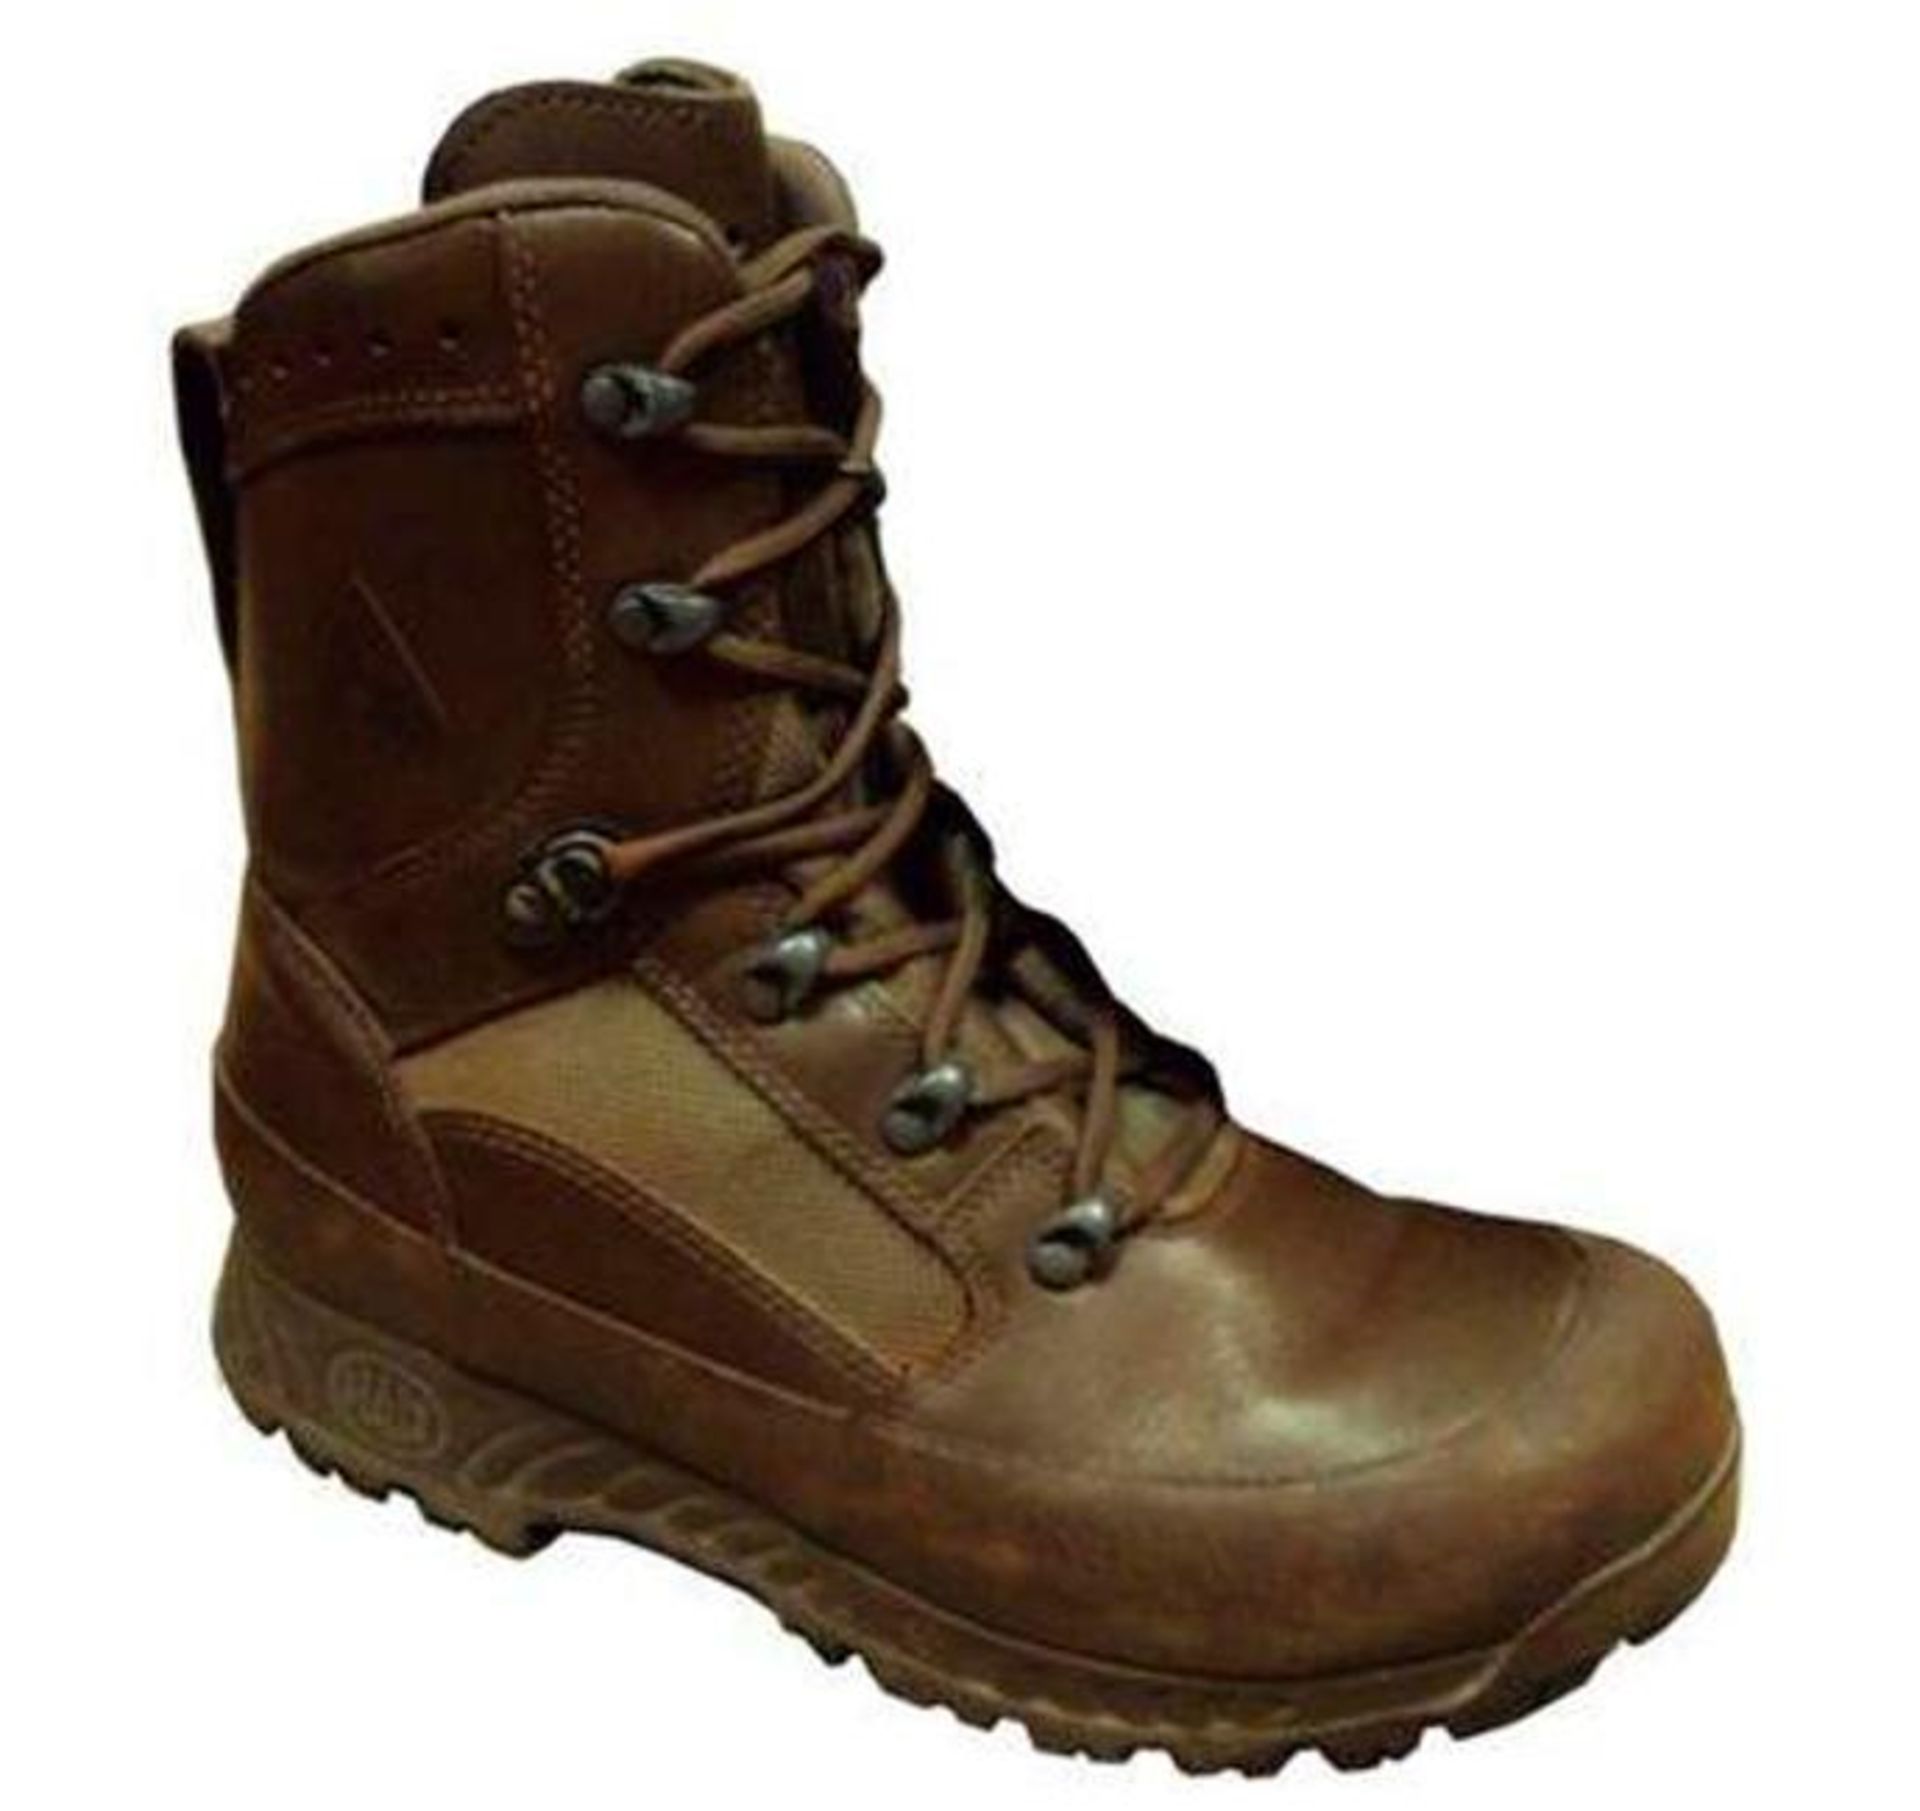 Pack of 10 - Haix Combat Boots - Mix of Sizes - Grade 1